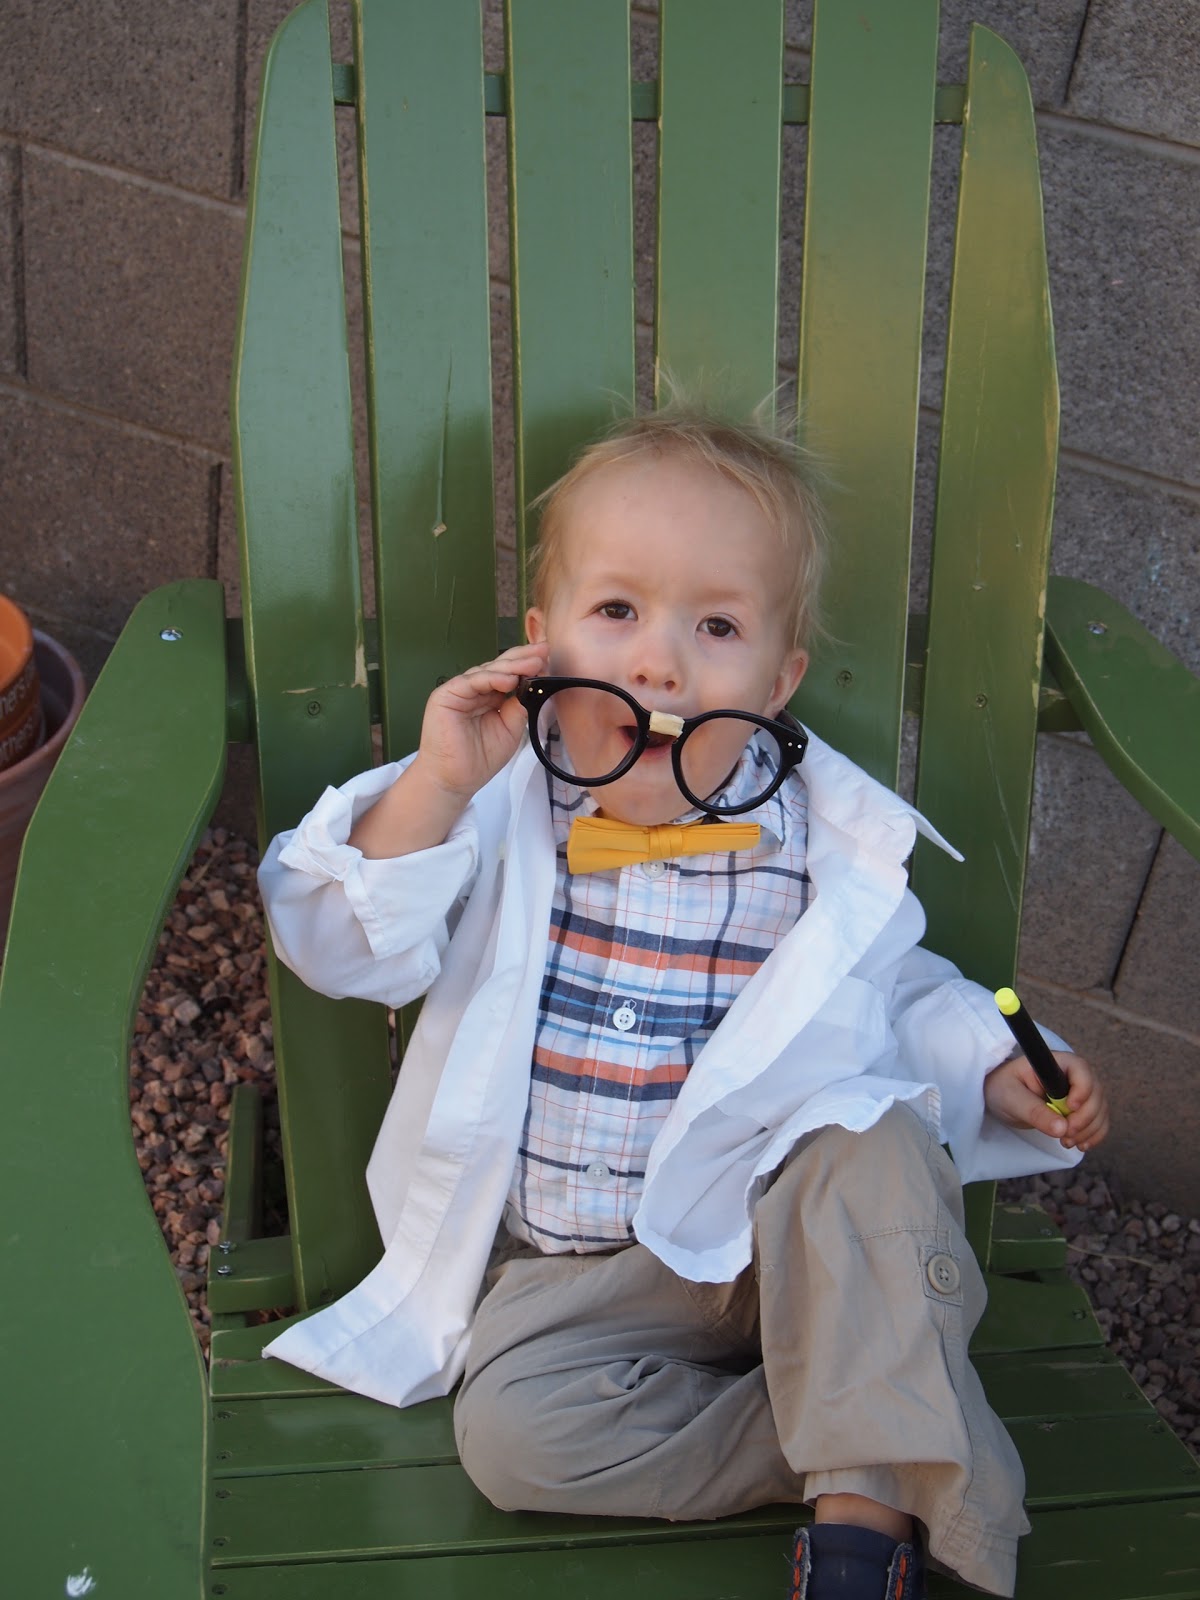 Cracked Up Kitchen: Mad Scientist and Other Inexpensive Halloween Costumes